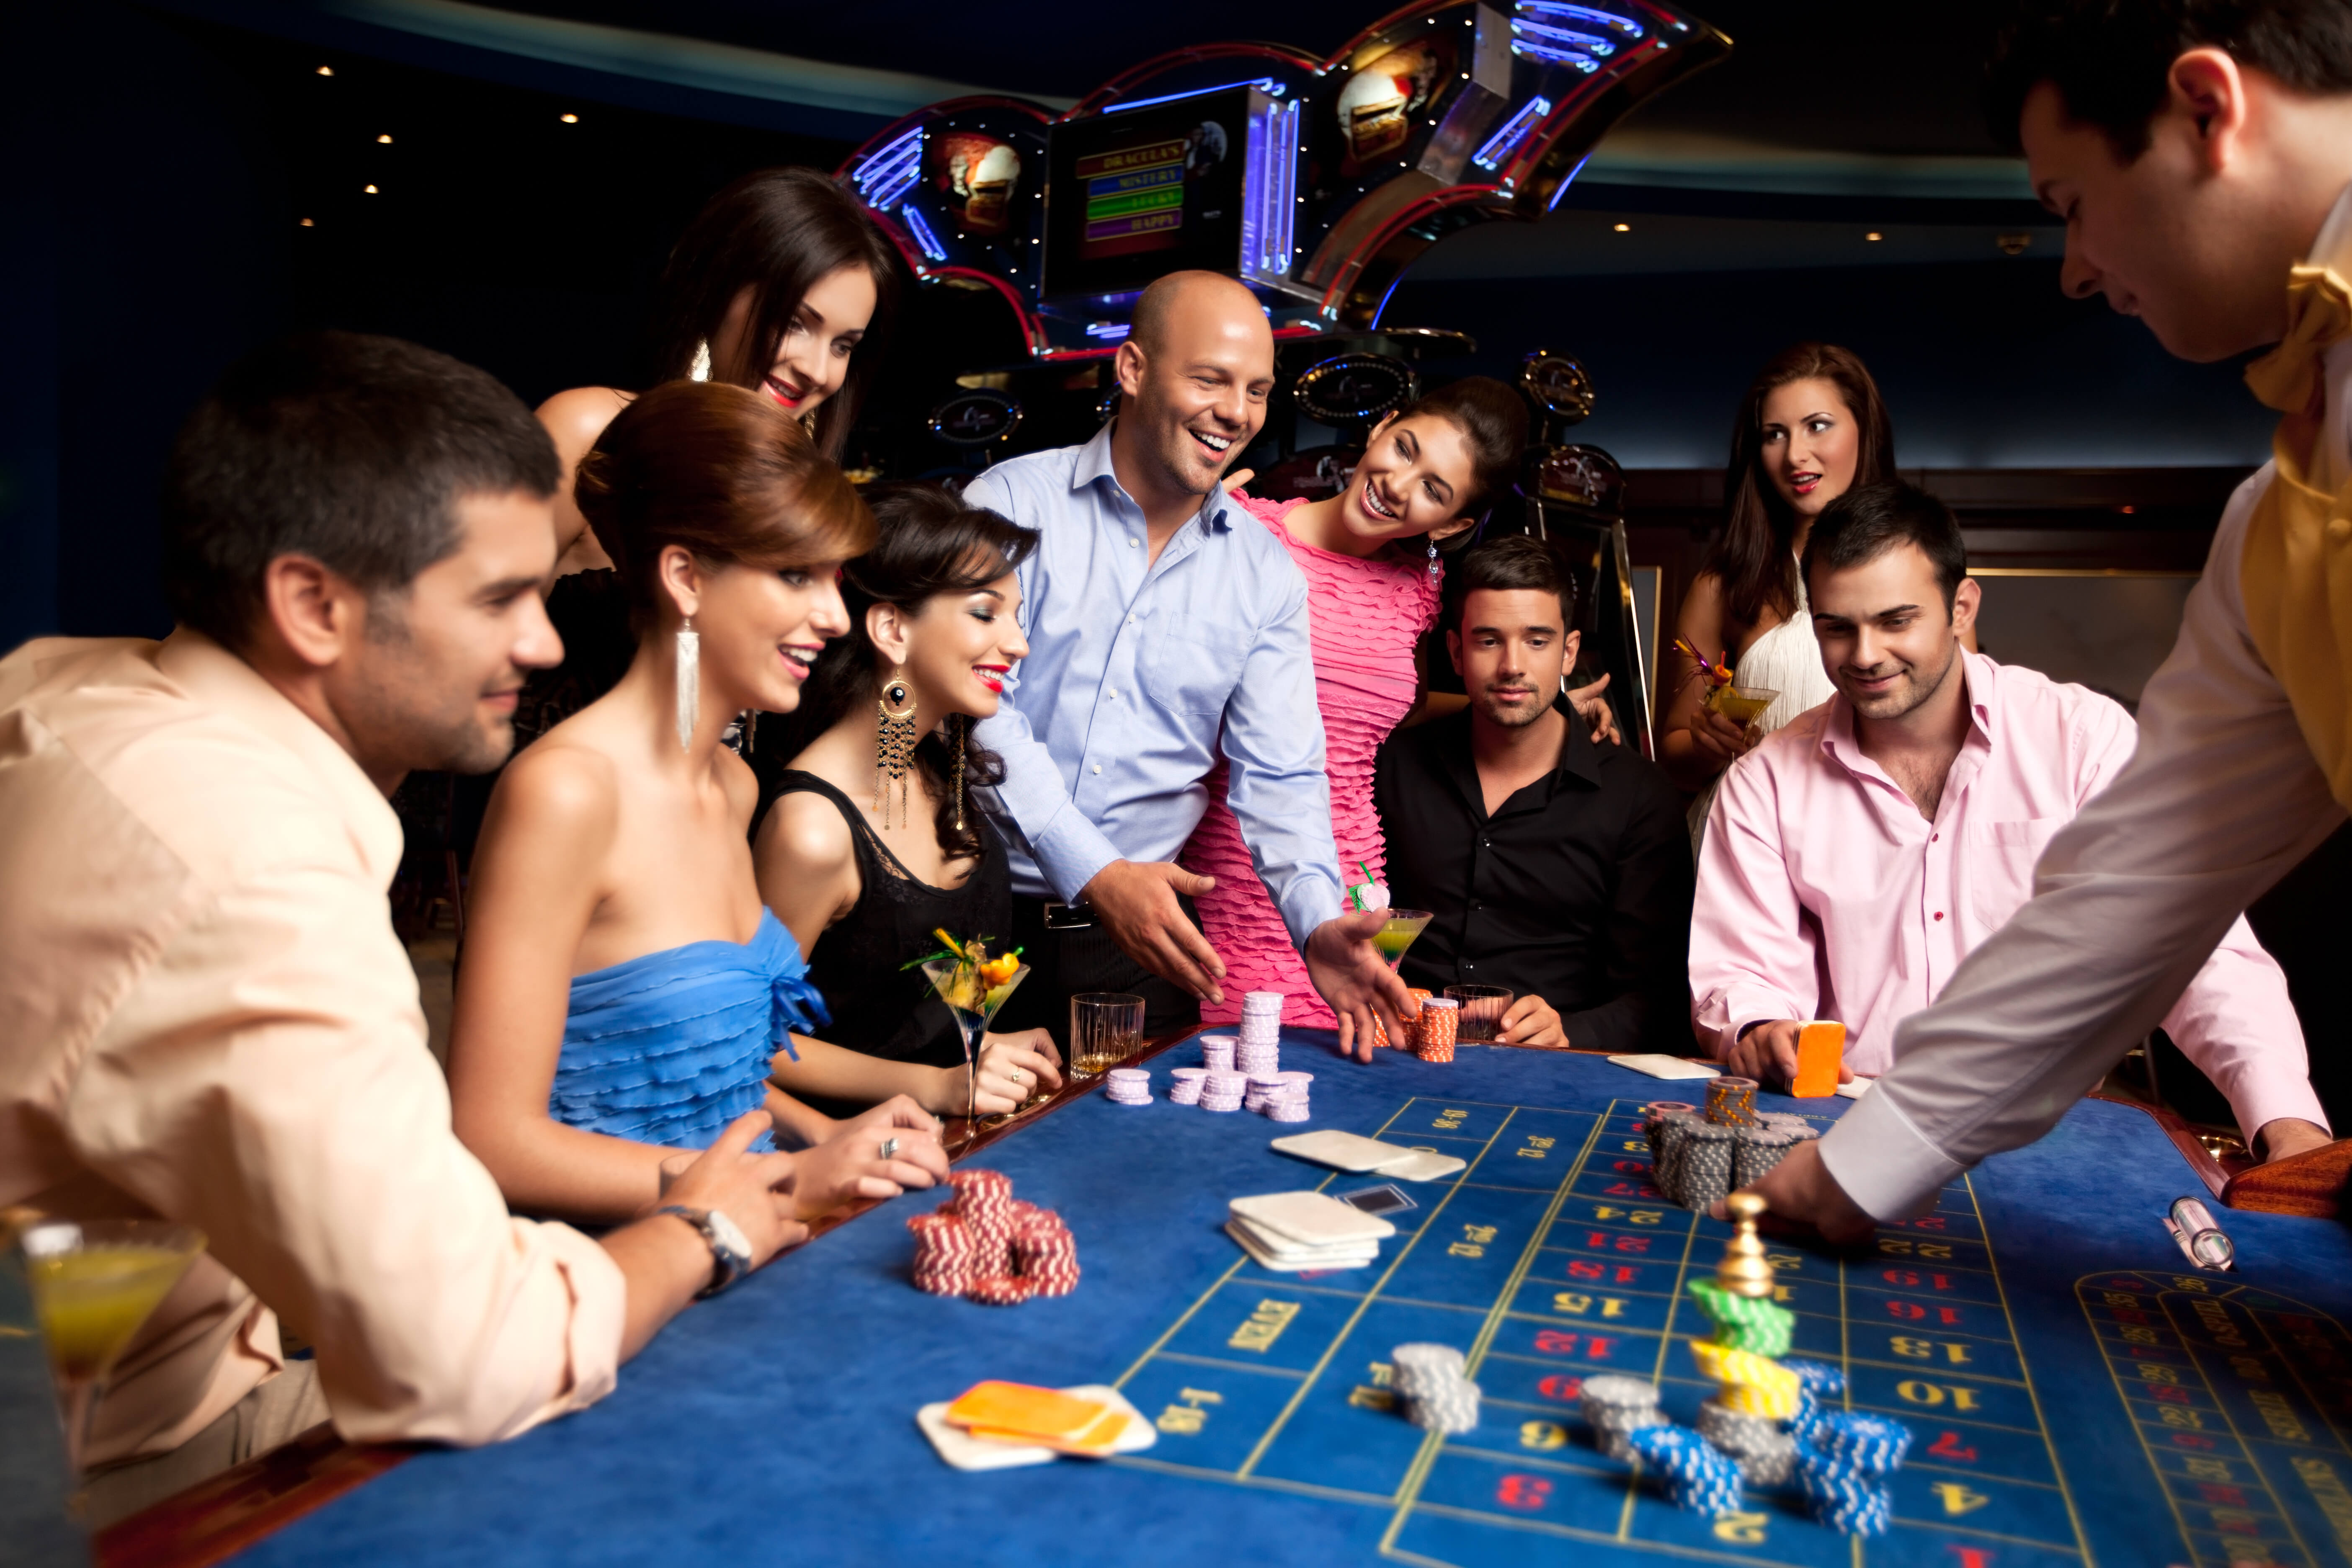 Live Roulette vs Going to A Casino: Weighing up the Roulette Revolution